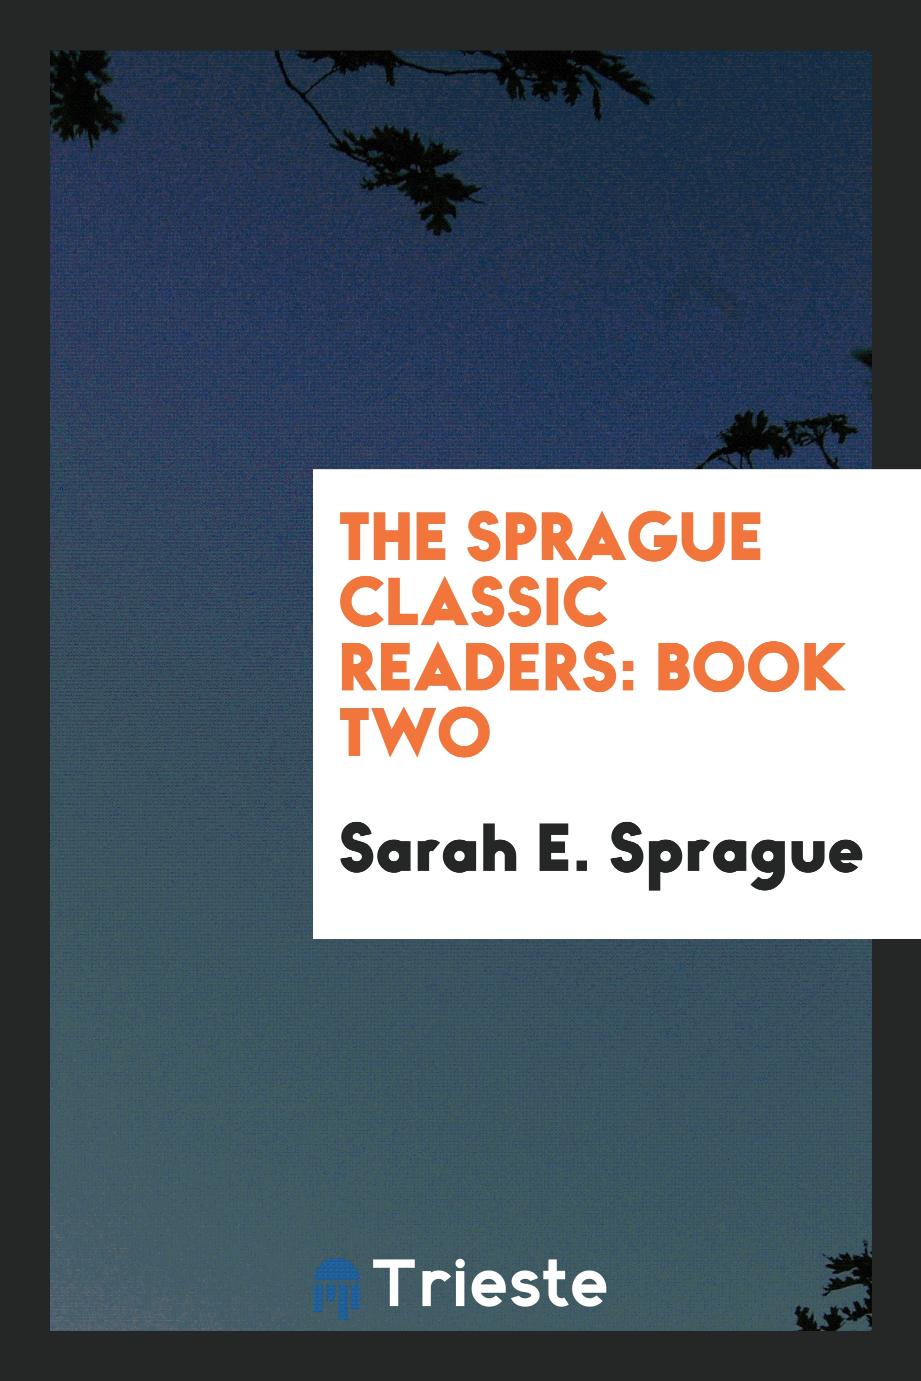 The Sprague Classic Readers: Book Two